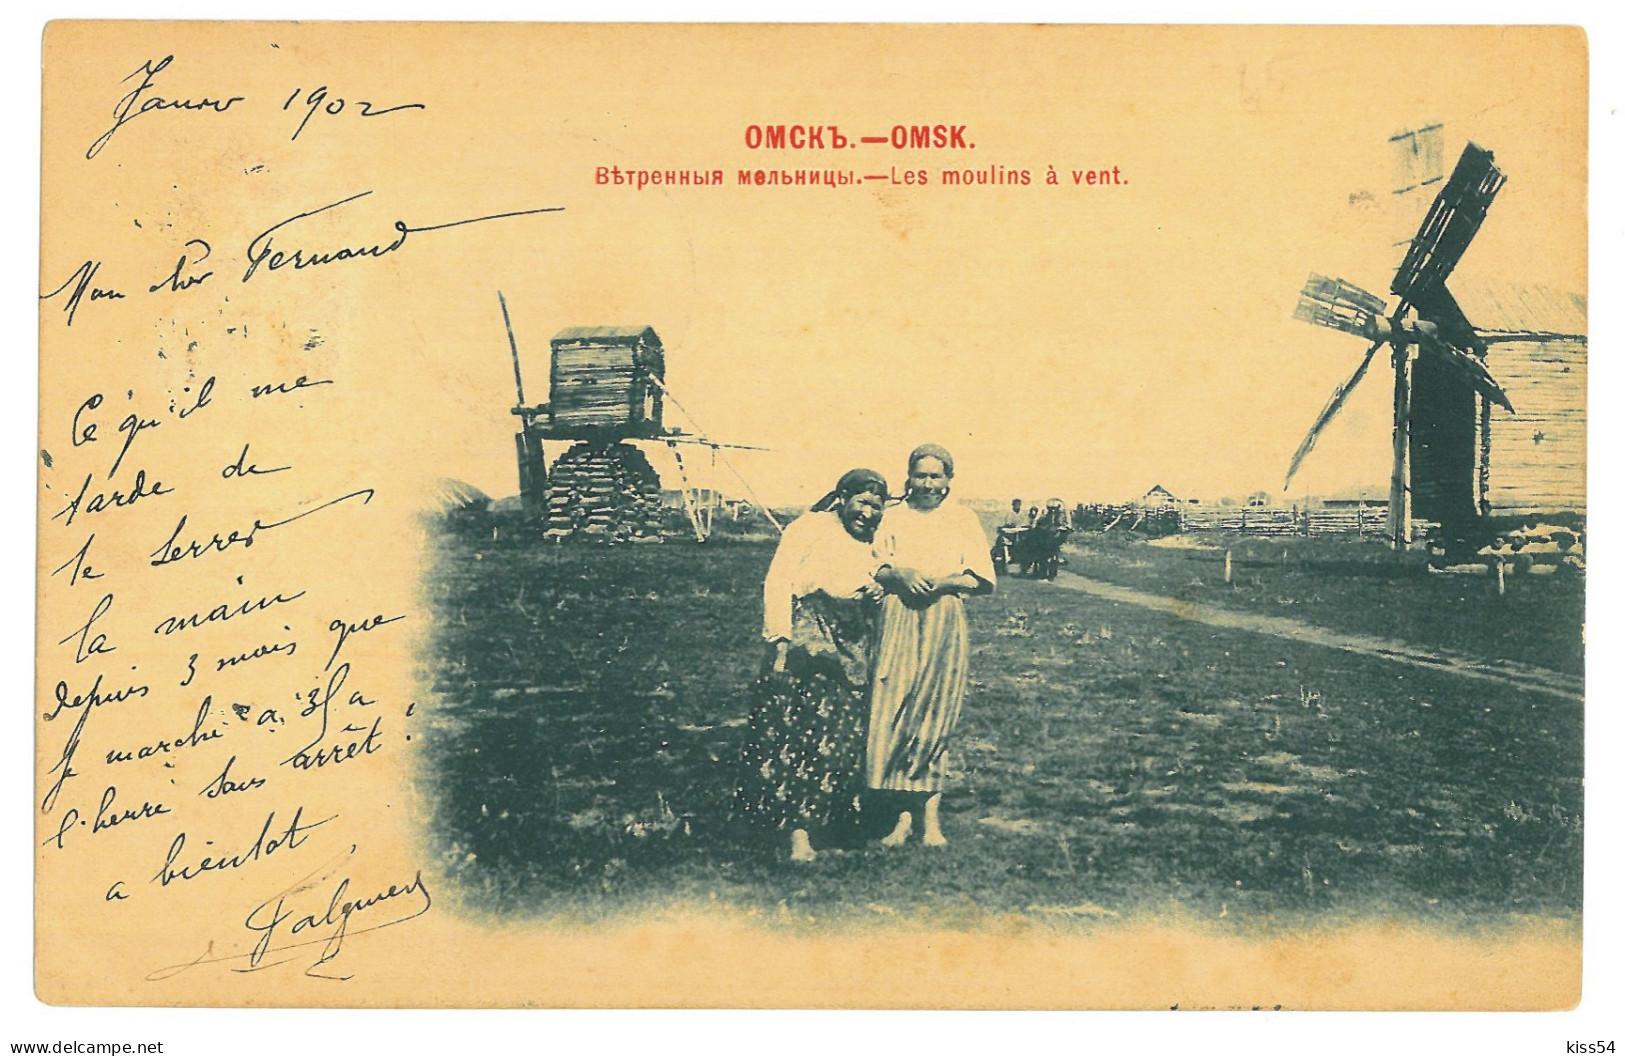 RUS 22 - 24563 OMSK, Ethnic Women & Windmills Russia - Old Postcard - Used - 1902 - Russland